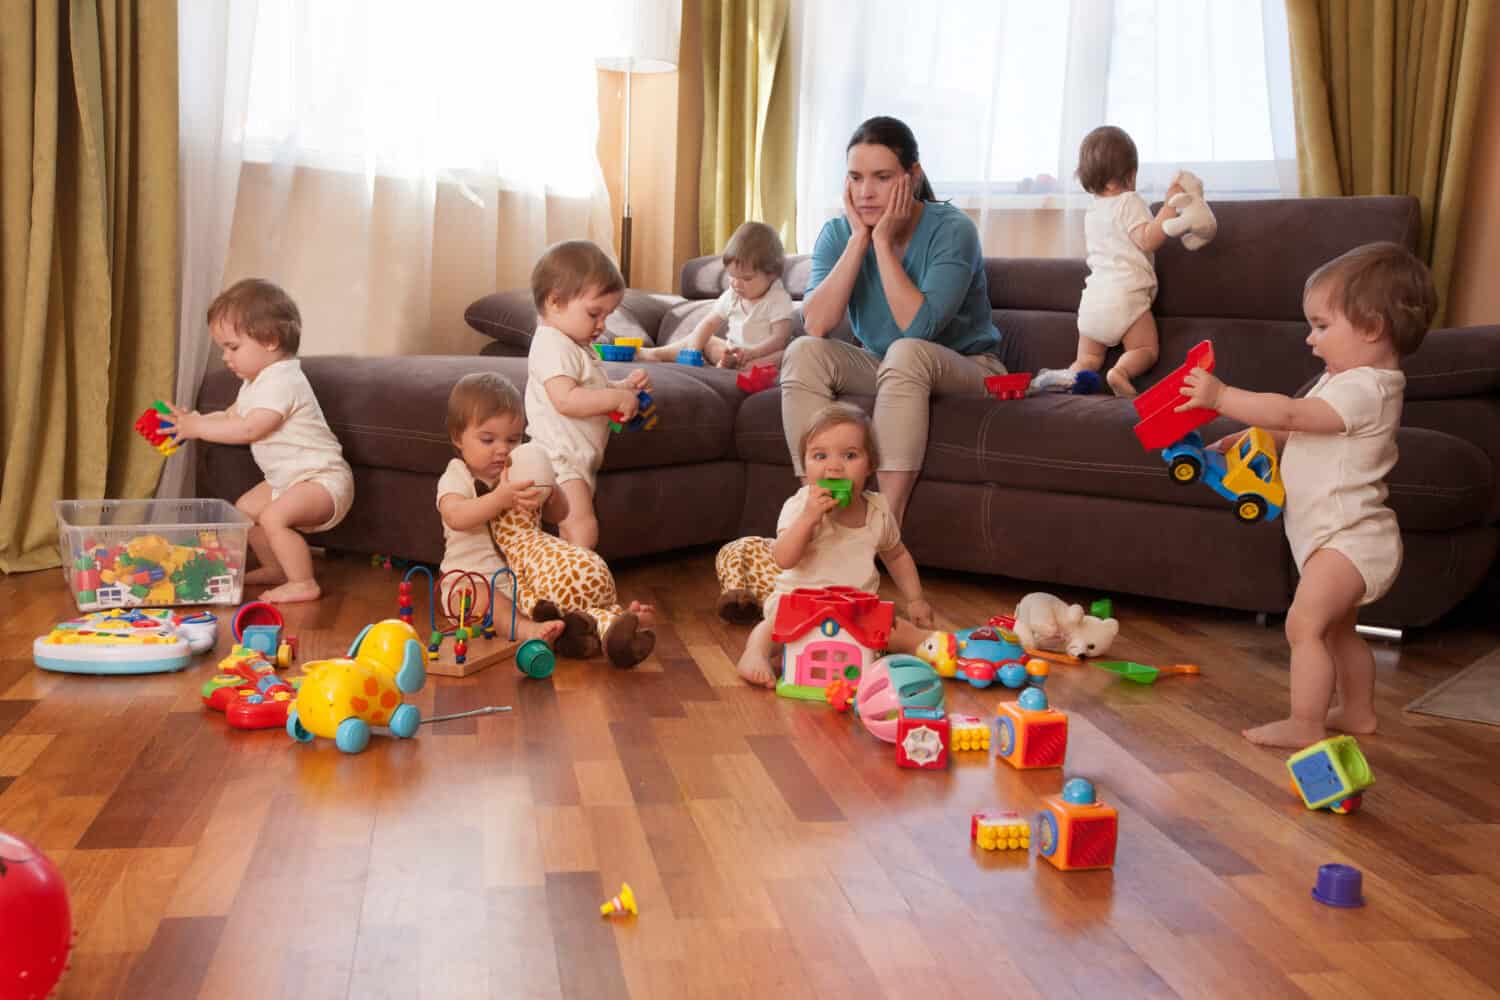 Woman sitting on a sofa in a room with several children